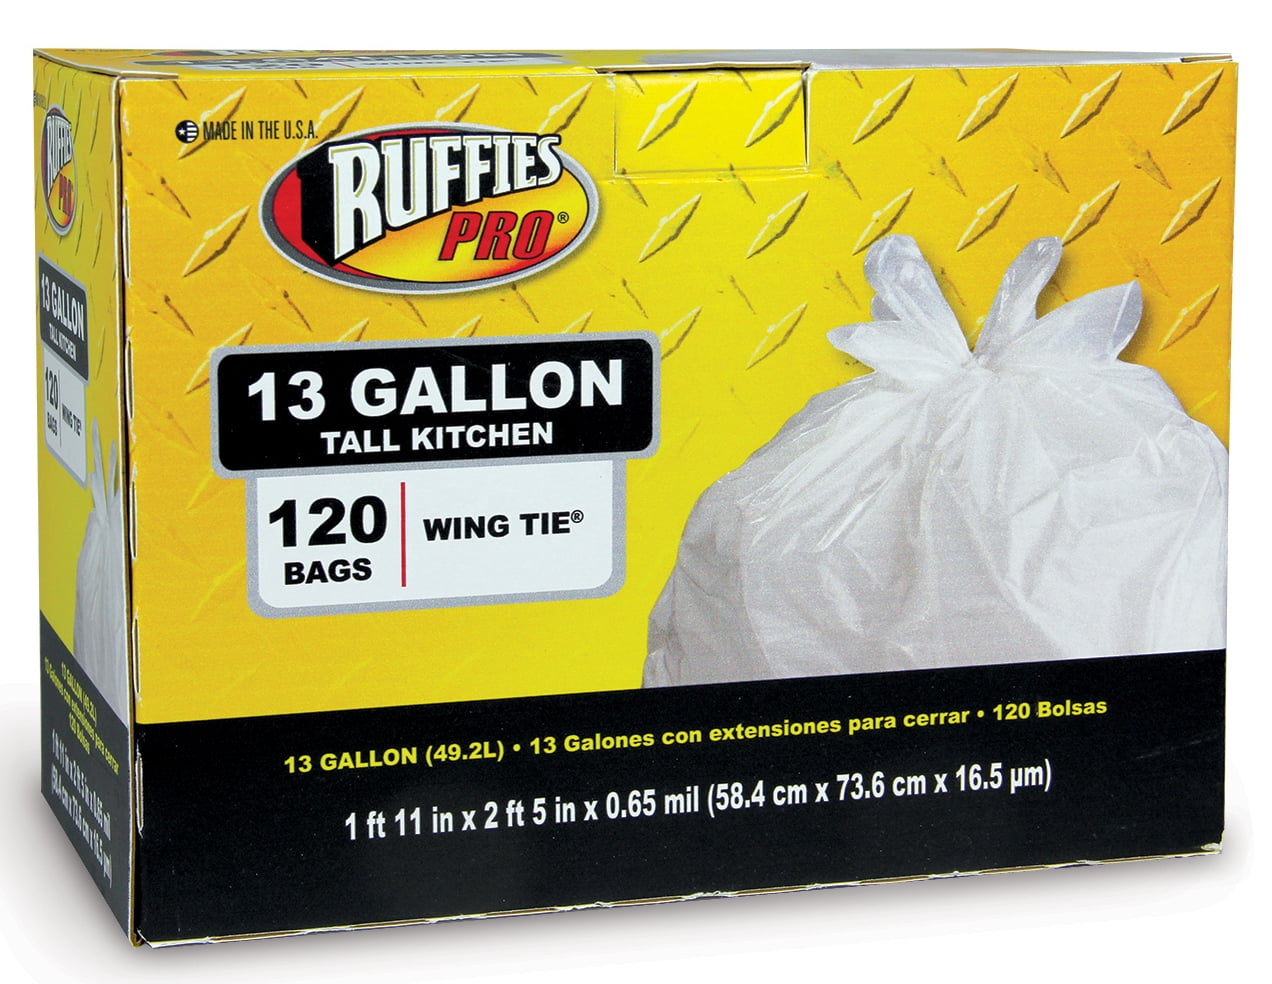 Ruffies Pro 1124910 White Pro Tall Kitchen Wing Tie Trash Bags 